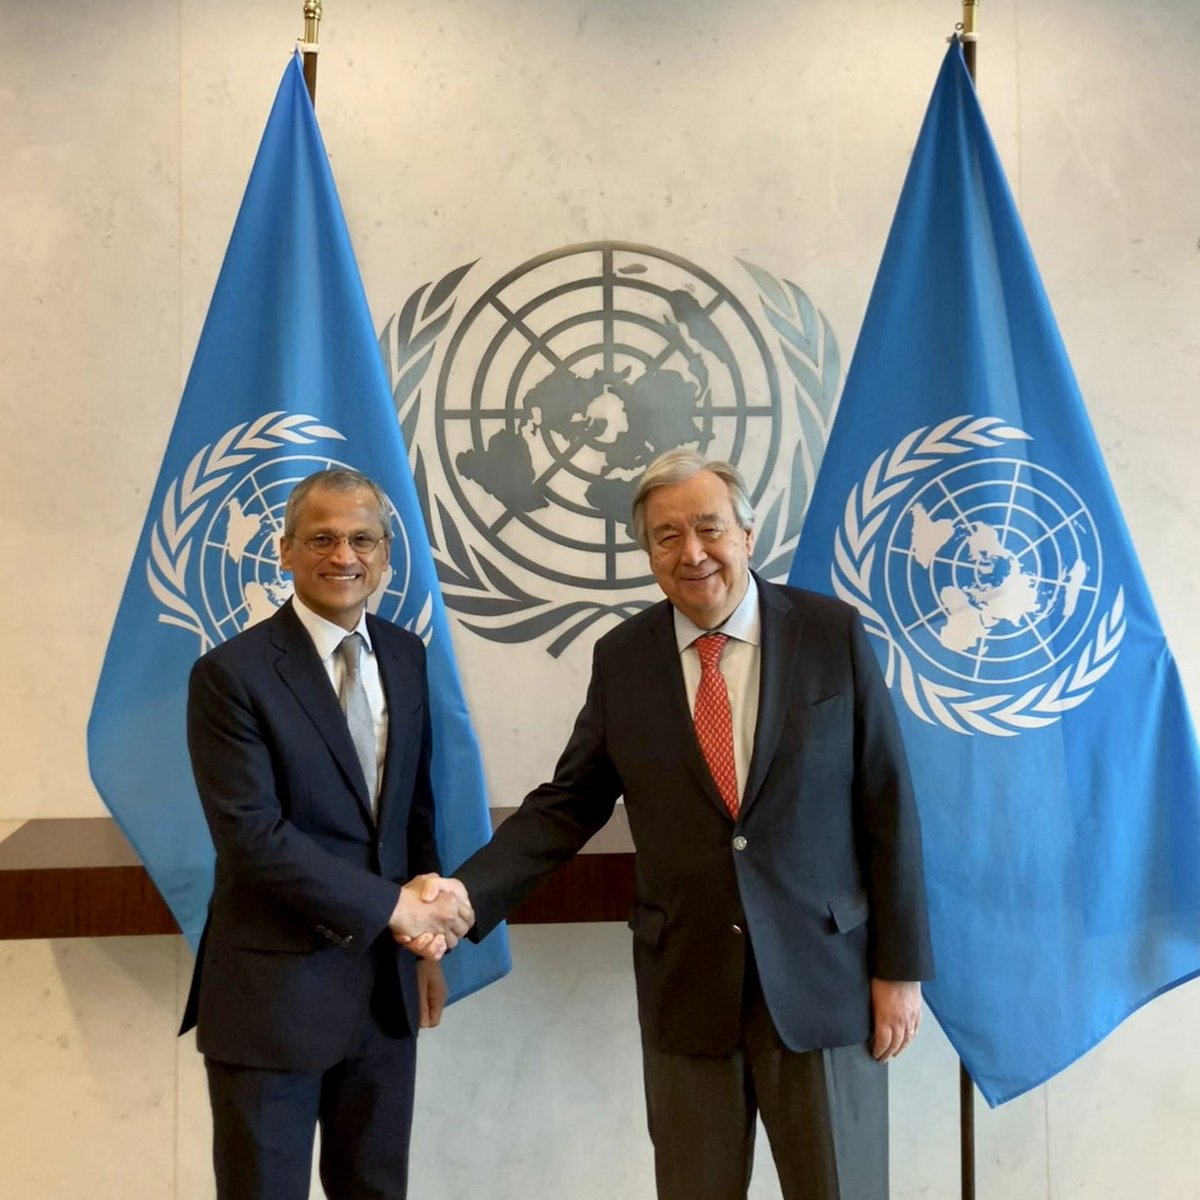 Always a great honour to meet UN Secretary-General @antonioguterres @UN and discuss global and regional issues and ways to strengthen the UN